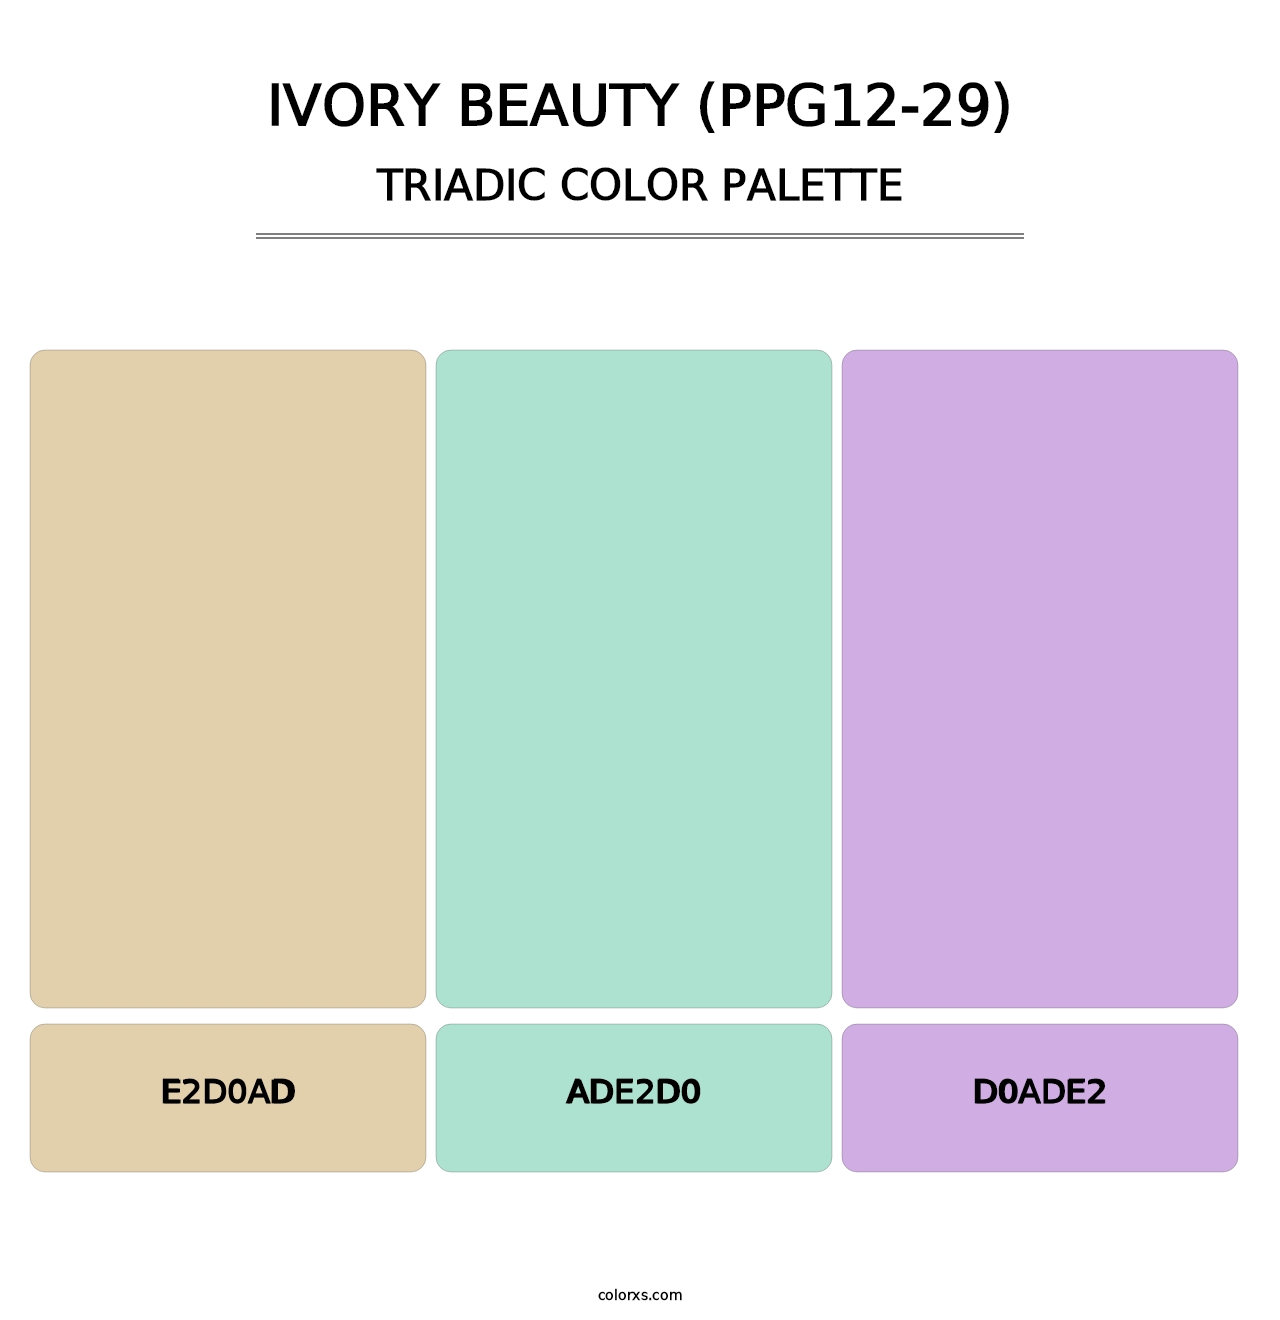 Ivory Beauty (PPG12-29) - Triadic Color Palette